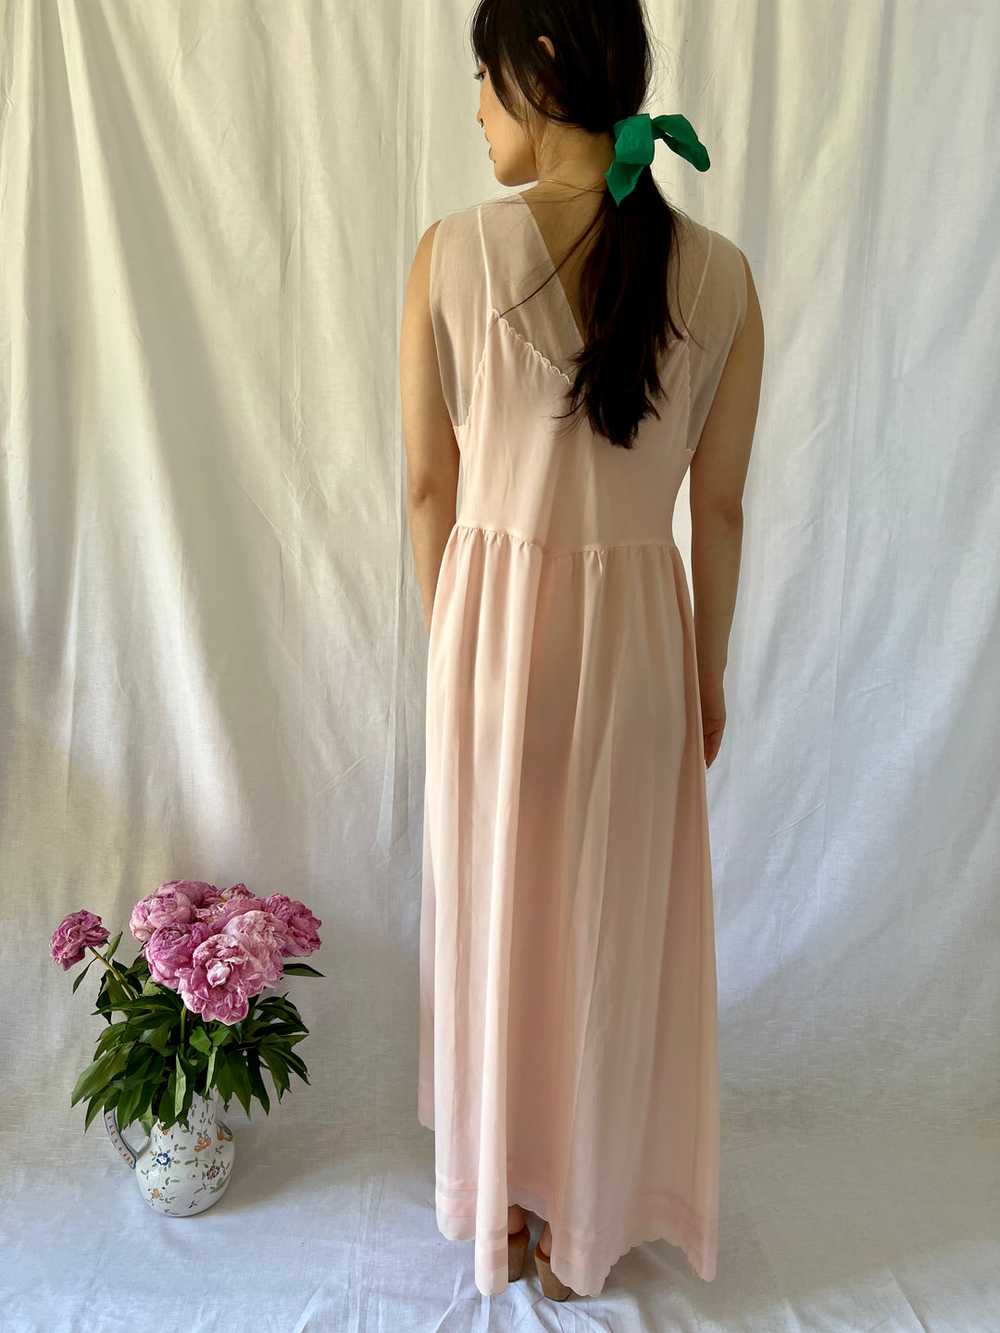 Vintage 1930s silk and tulle blush pink dress - image 6